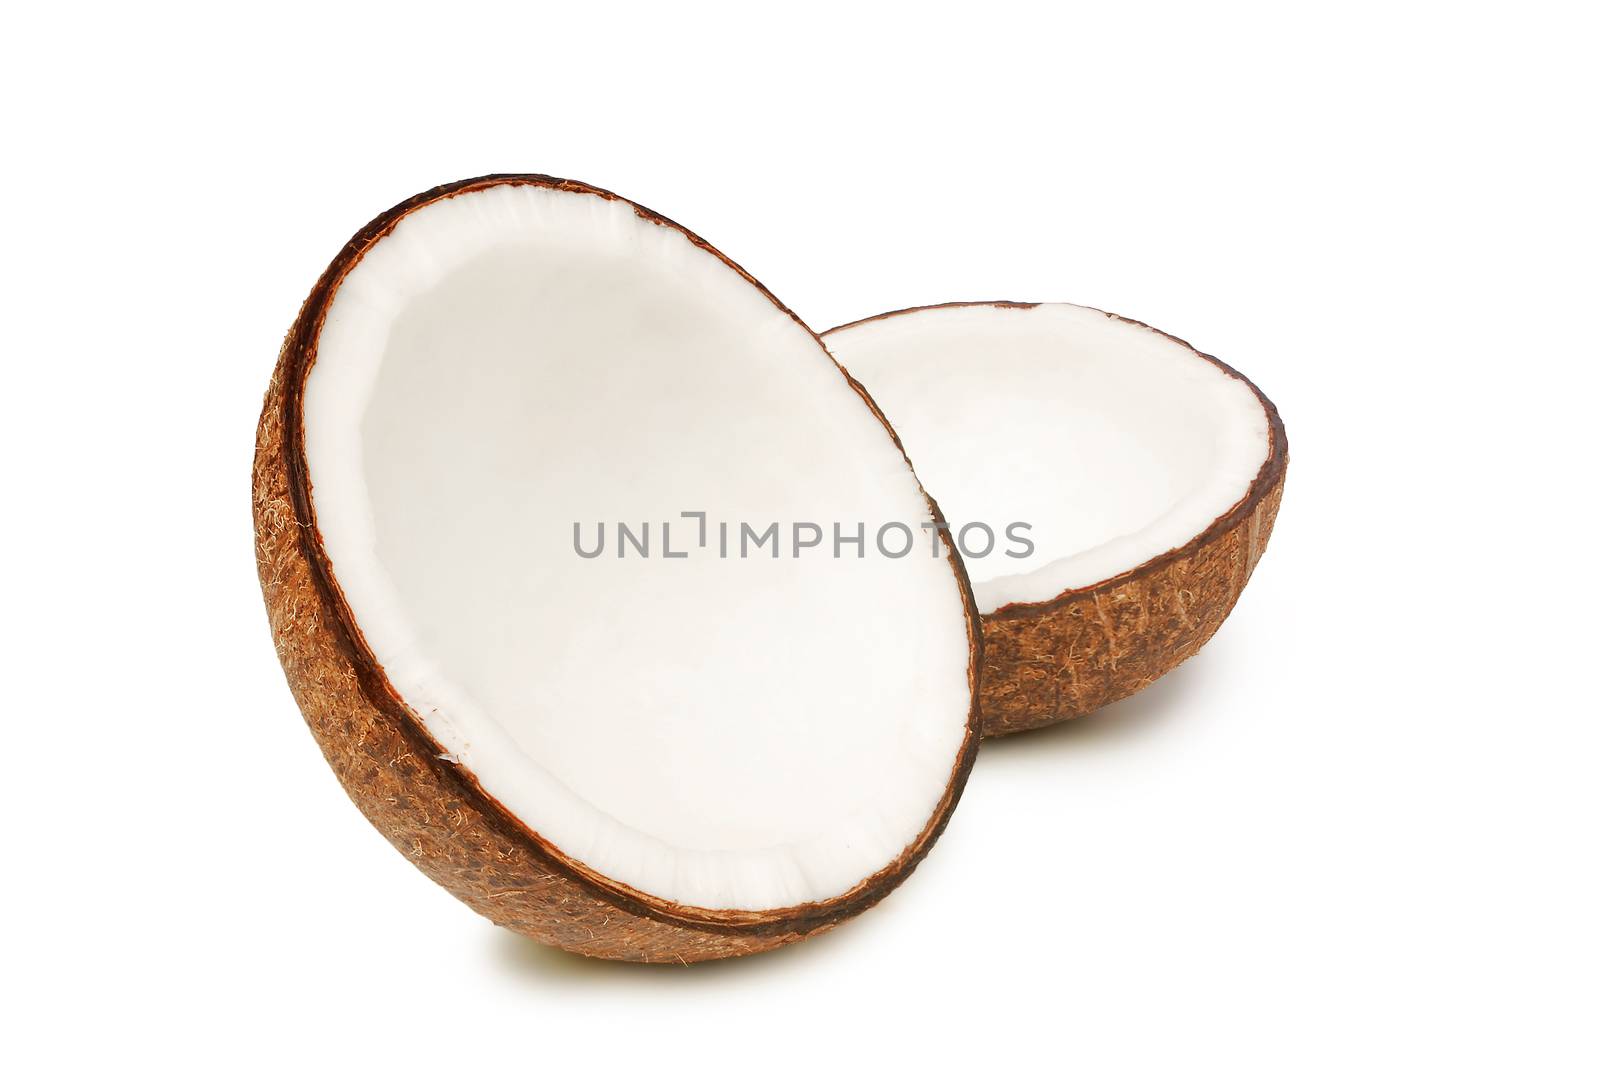 Dried coconut on white background.with clipping path.